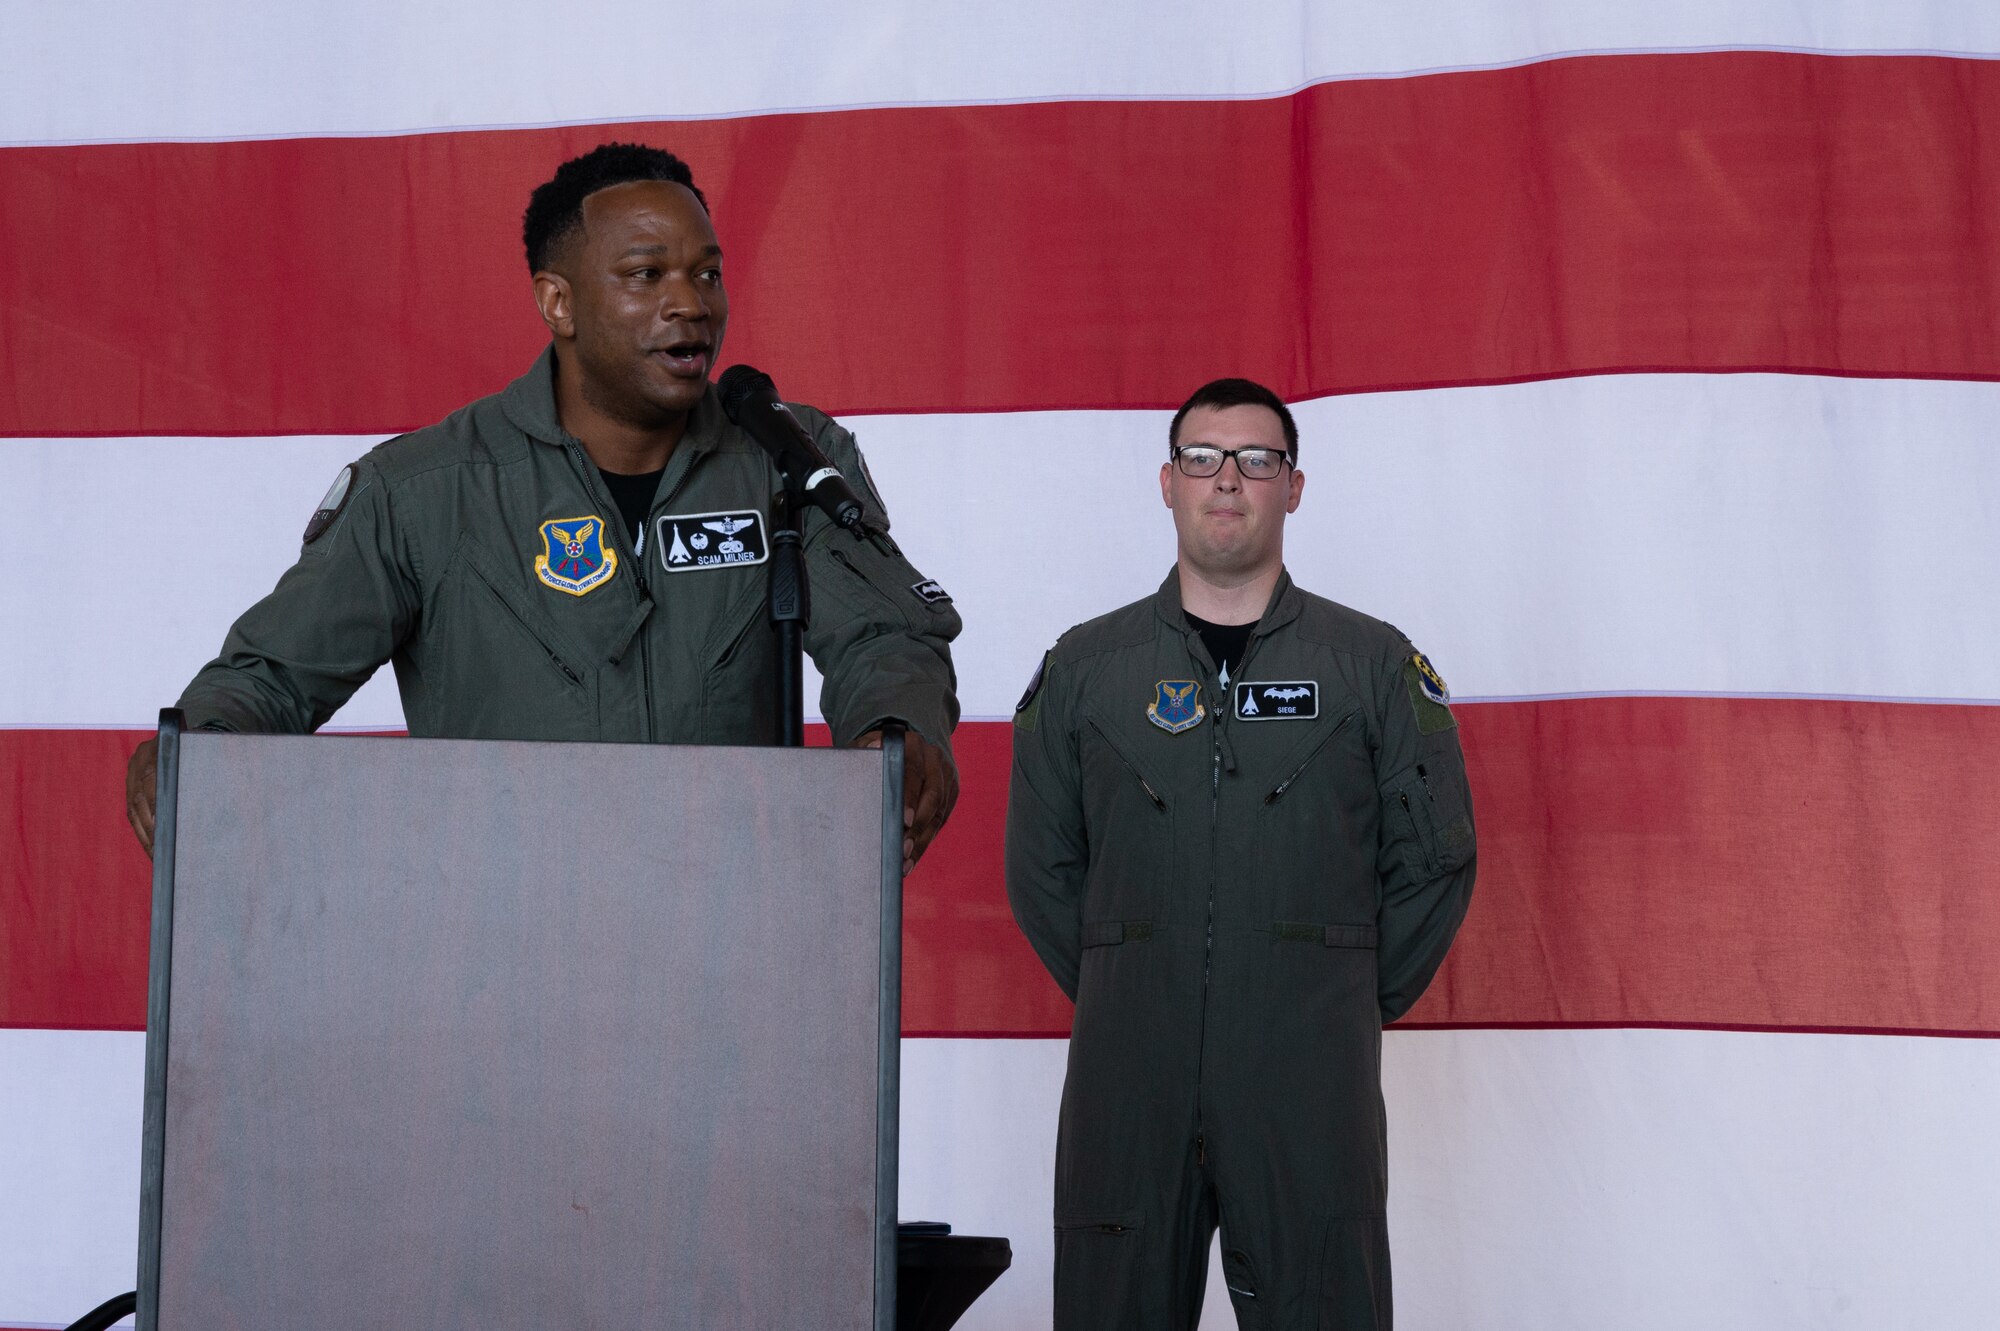 U.S. Air Force Lt. Col. Brian Milner, 9th Bomb
Squadron commander, delivers remarks after
assuming command of the squadron during the 9th
BS change of command at Dyess Air Force Base,
Texas, July 7, 2023. Milner is in charge of leading the
9th BS which is the oldest active bomb squadron in
the Air Force and maintains combat readiness to
ensure delivery of rapid and decisive airpower on a
large scale in support of conventional warfare
taskings around the world. (U.S. Air Force photo by
Airman 1st Class Alondra Cristobal Hernandez)